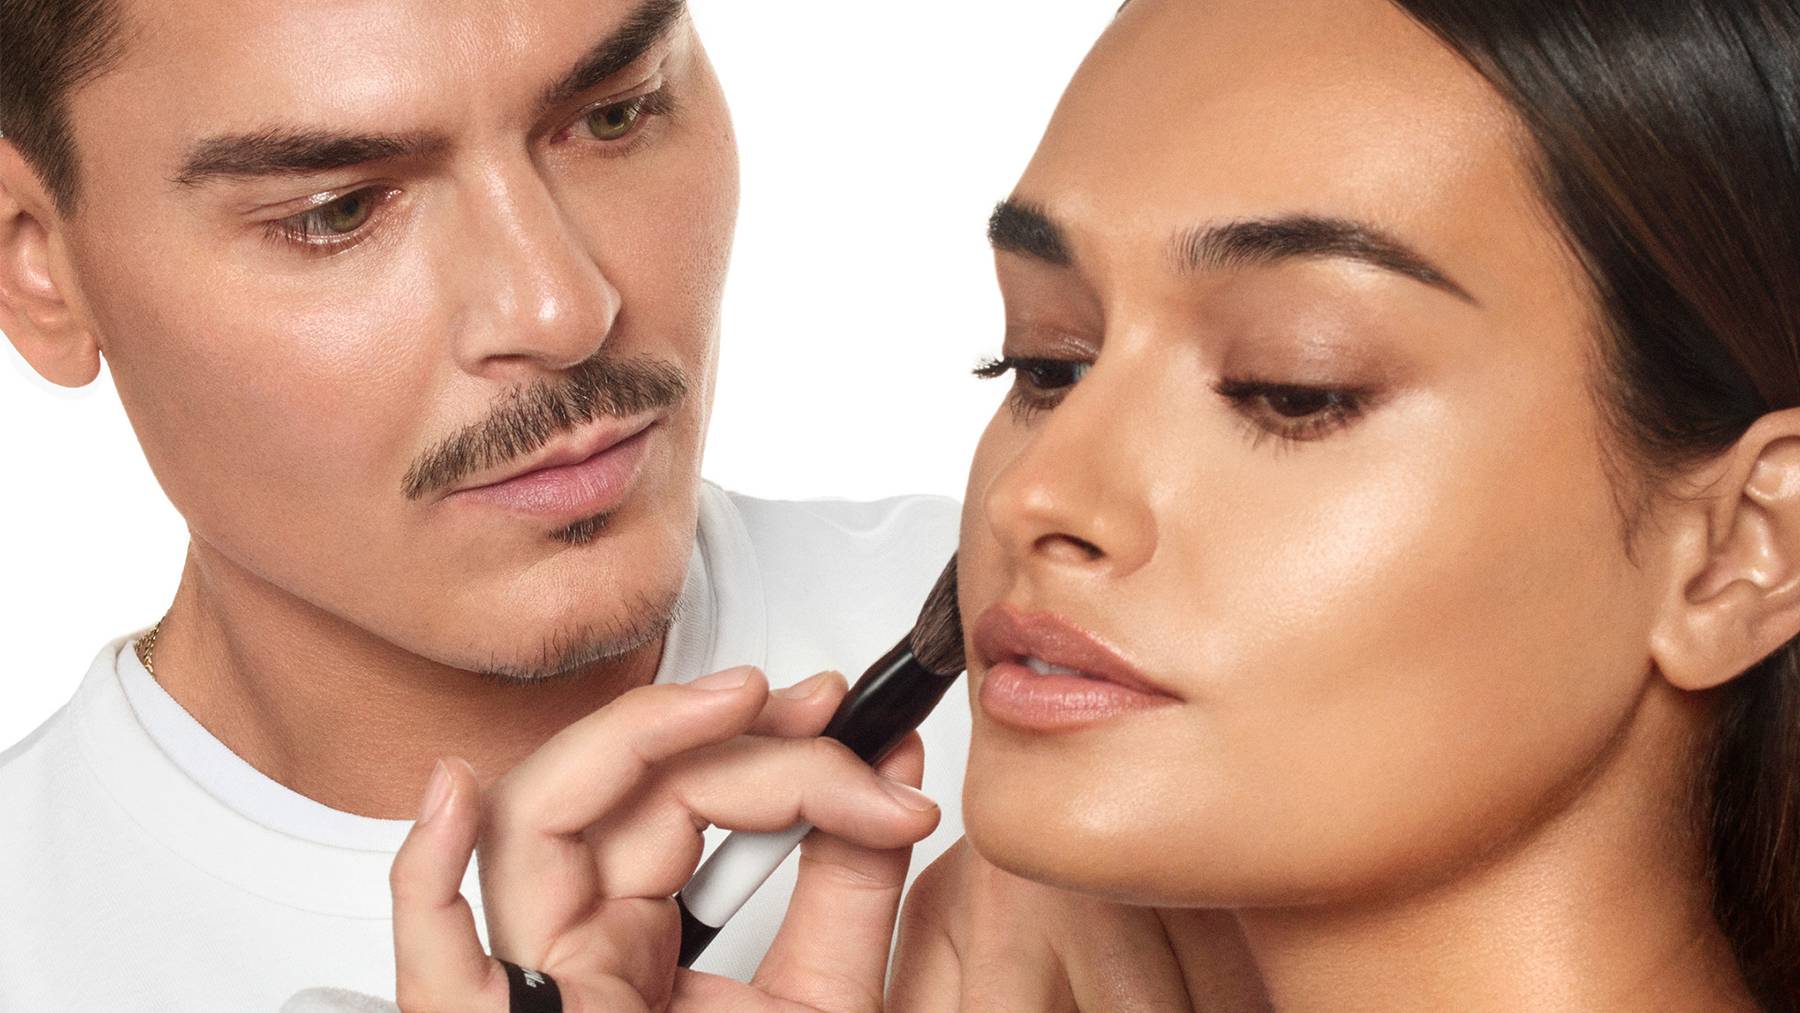 Makeup by Mario has received a $40 million minority investment from private equity, valuing the brand at over $200 million.